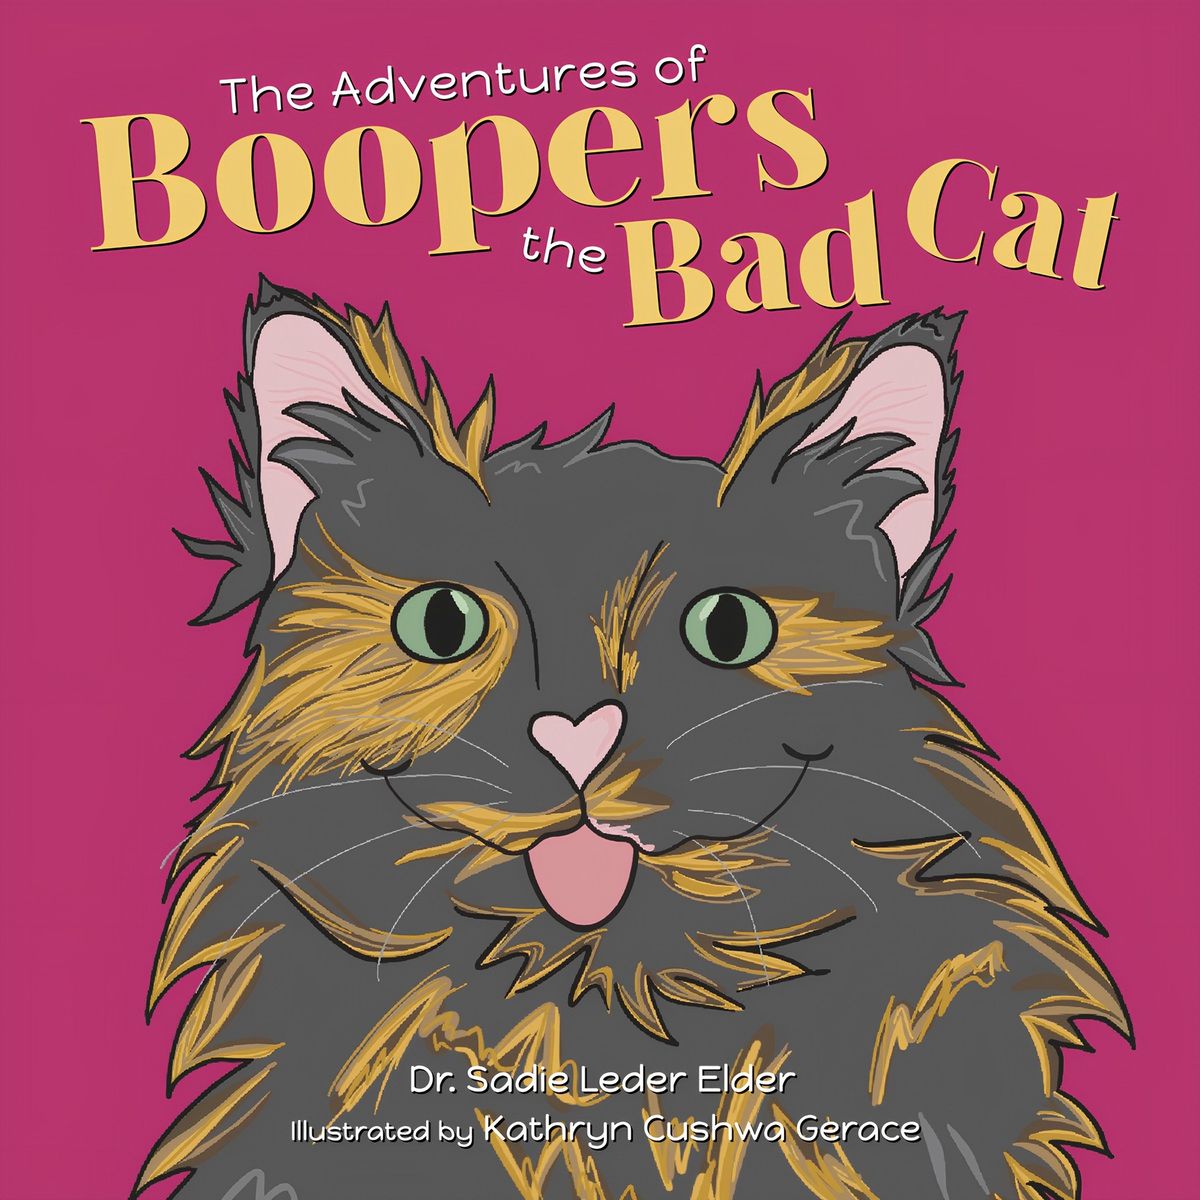 \u201cBoopers the Bad Cat\u201d Storytime & Craft in Little Red Schoolhouse